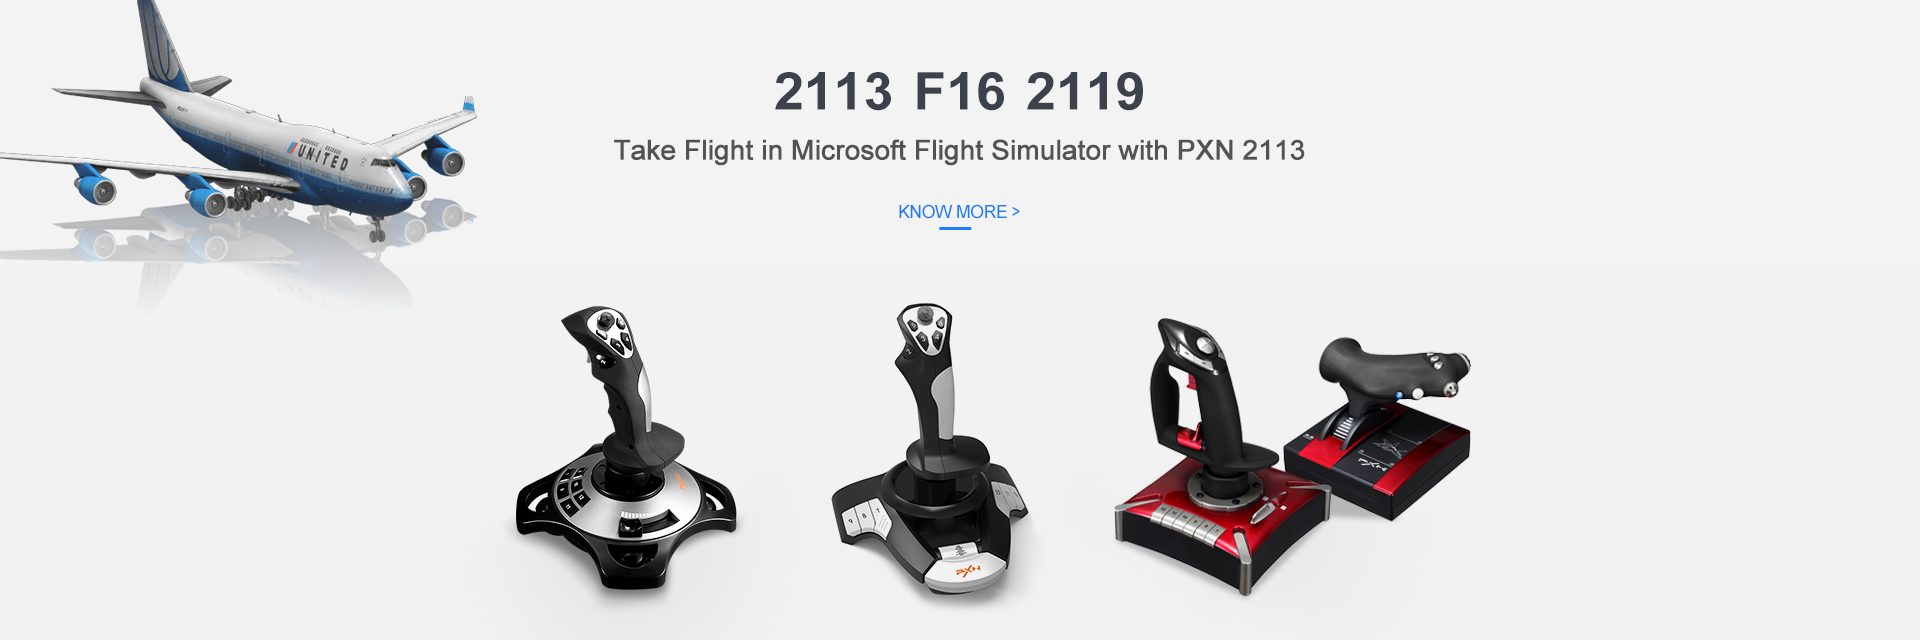 How To Use PS4 Controller On Microsoft Flight Simulator 2020 